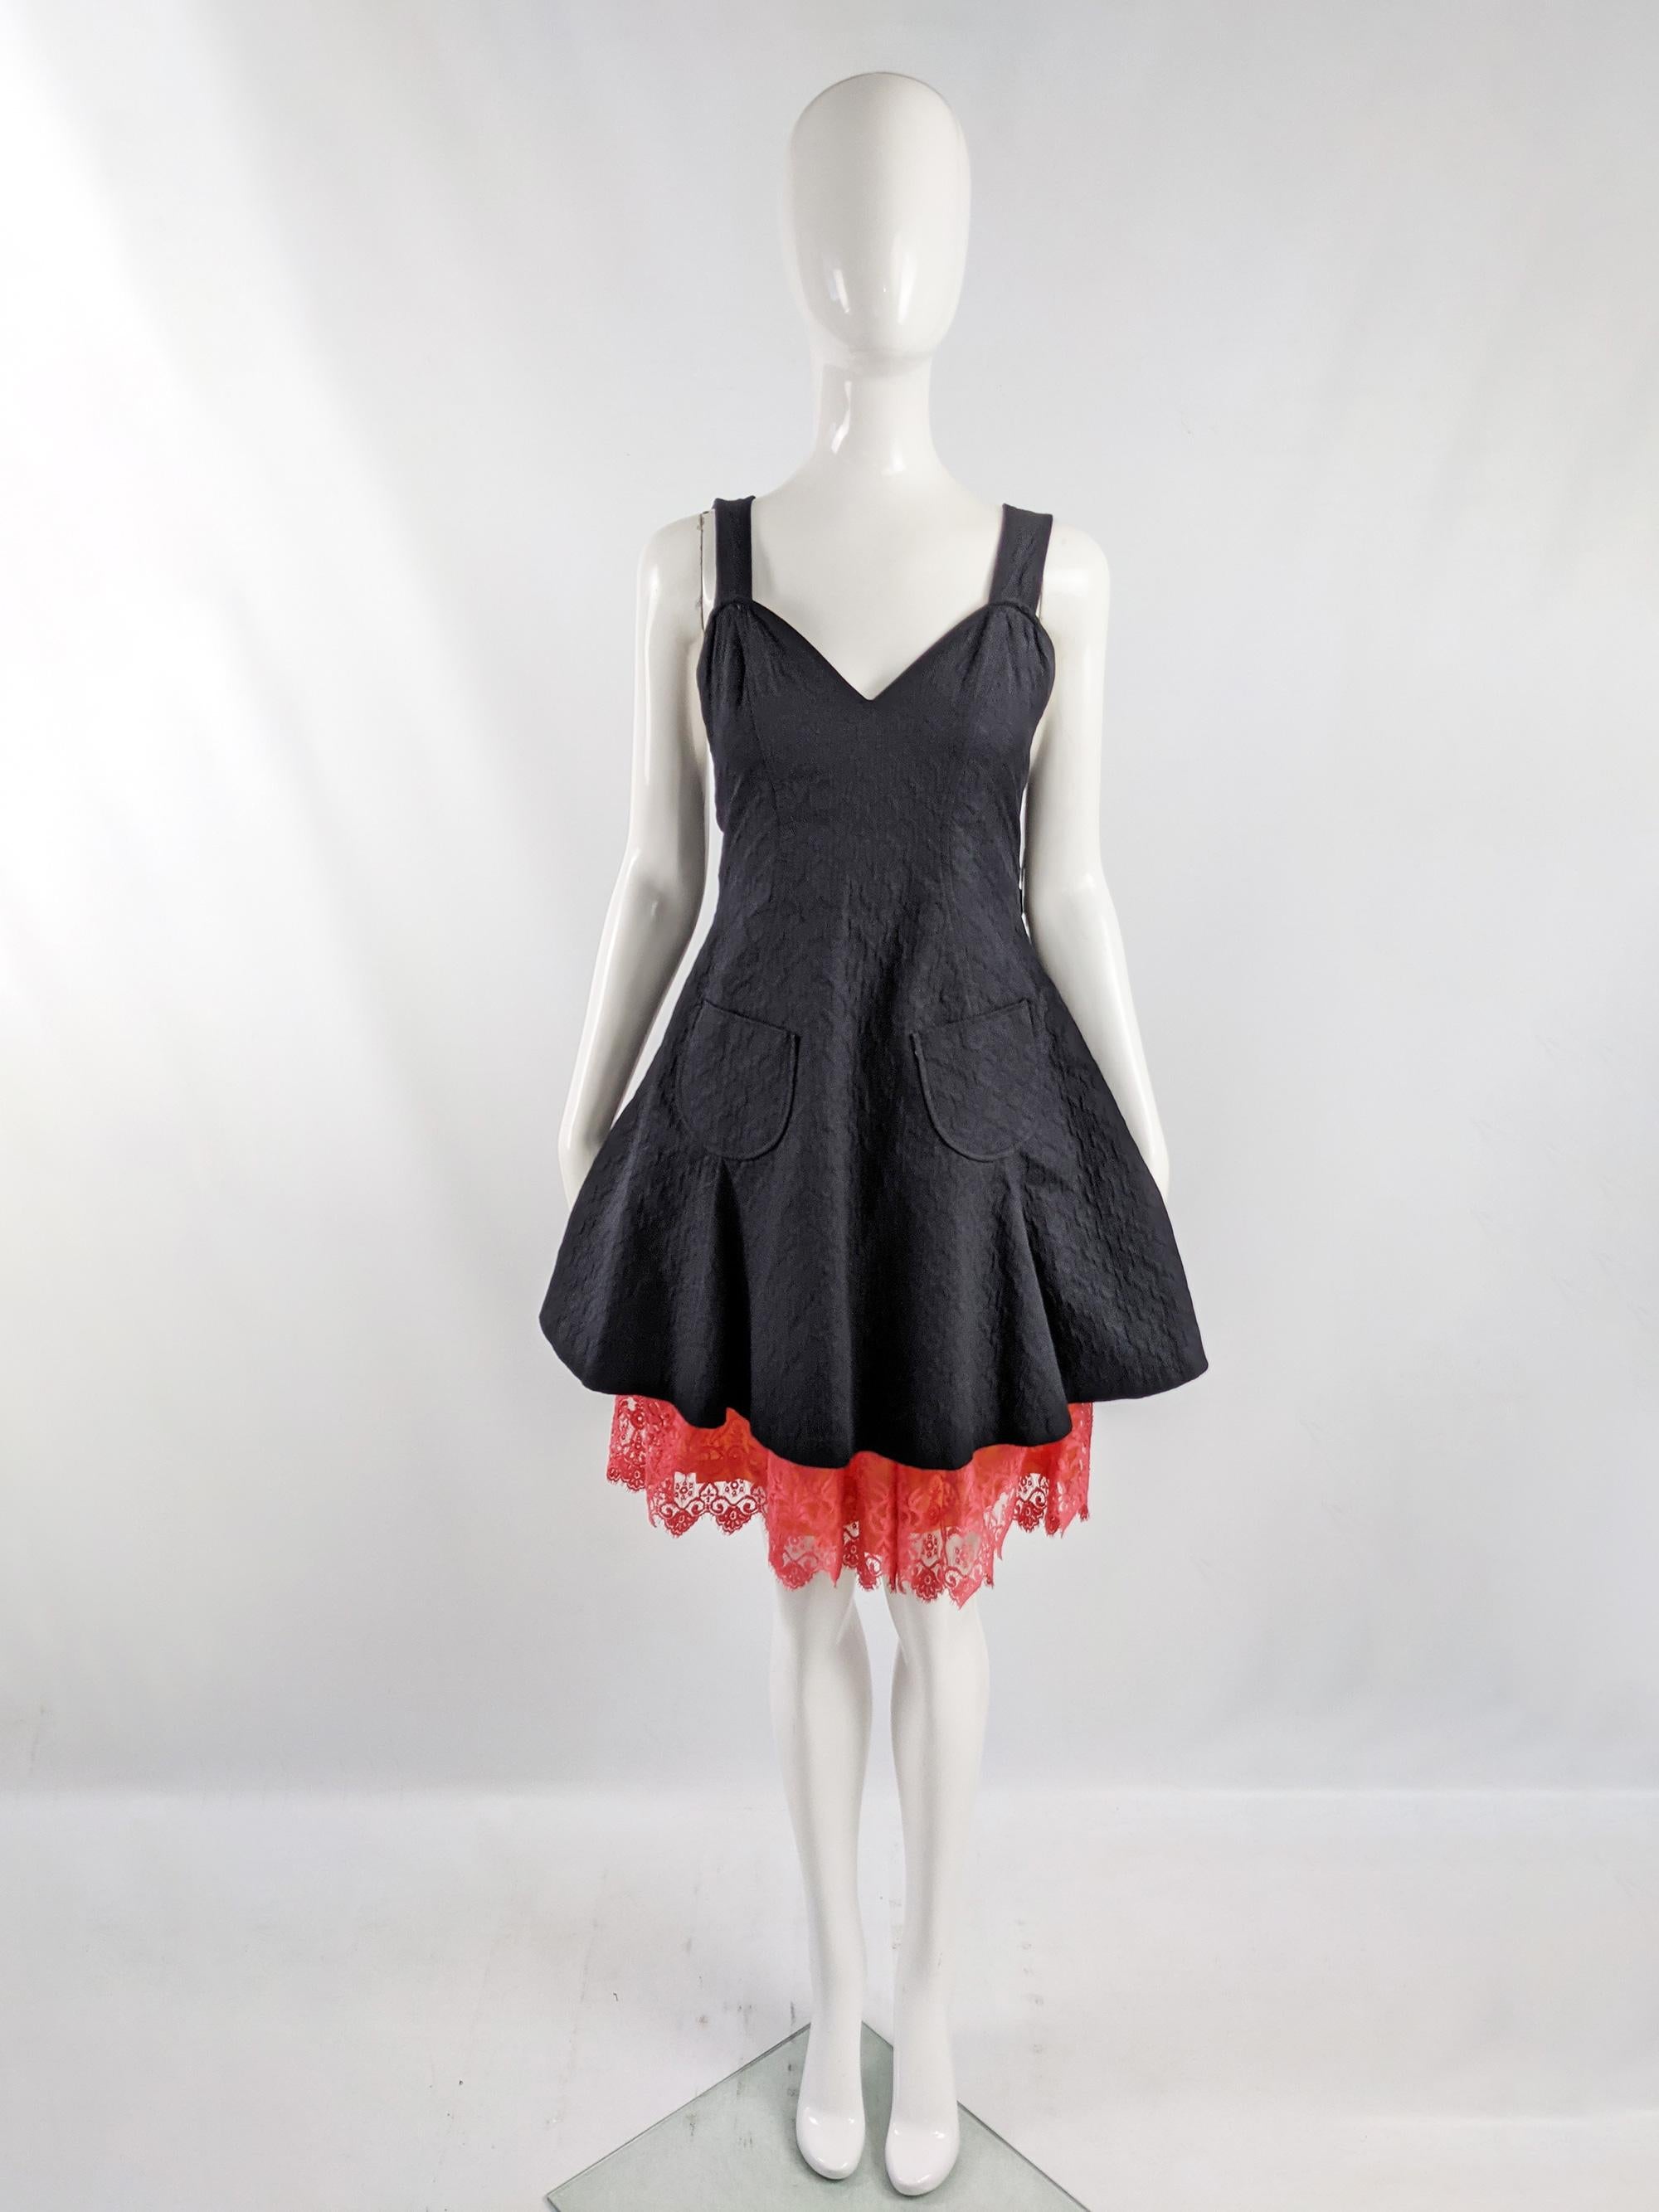 An unusual vintage womens Christian Lacroix party dress from the late 90s. In a black cotton jacquard fabric with an apron style wrap fastening at the back over the top of a coral pink and orange lace skirt. 

Size: Marked vintage 40 but measures